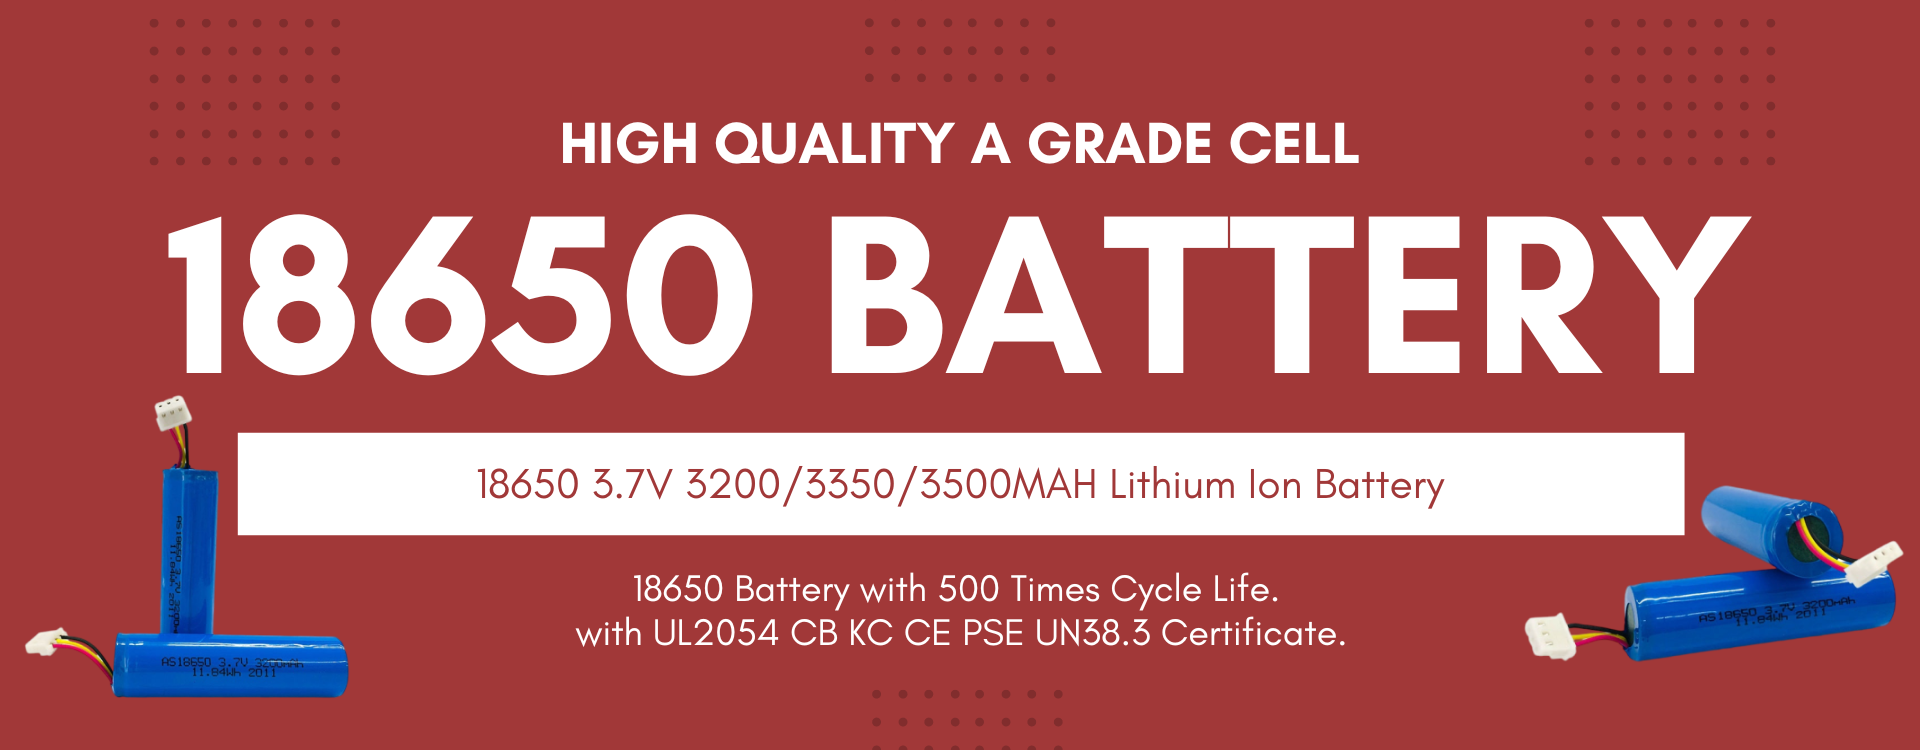 18650 3.7v 3200/3350/3500mAh Lithium Ion Battery Cell 